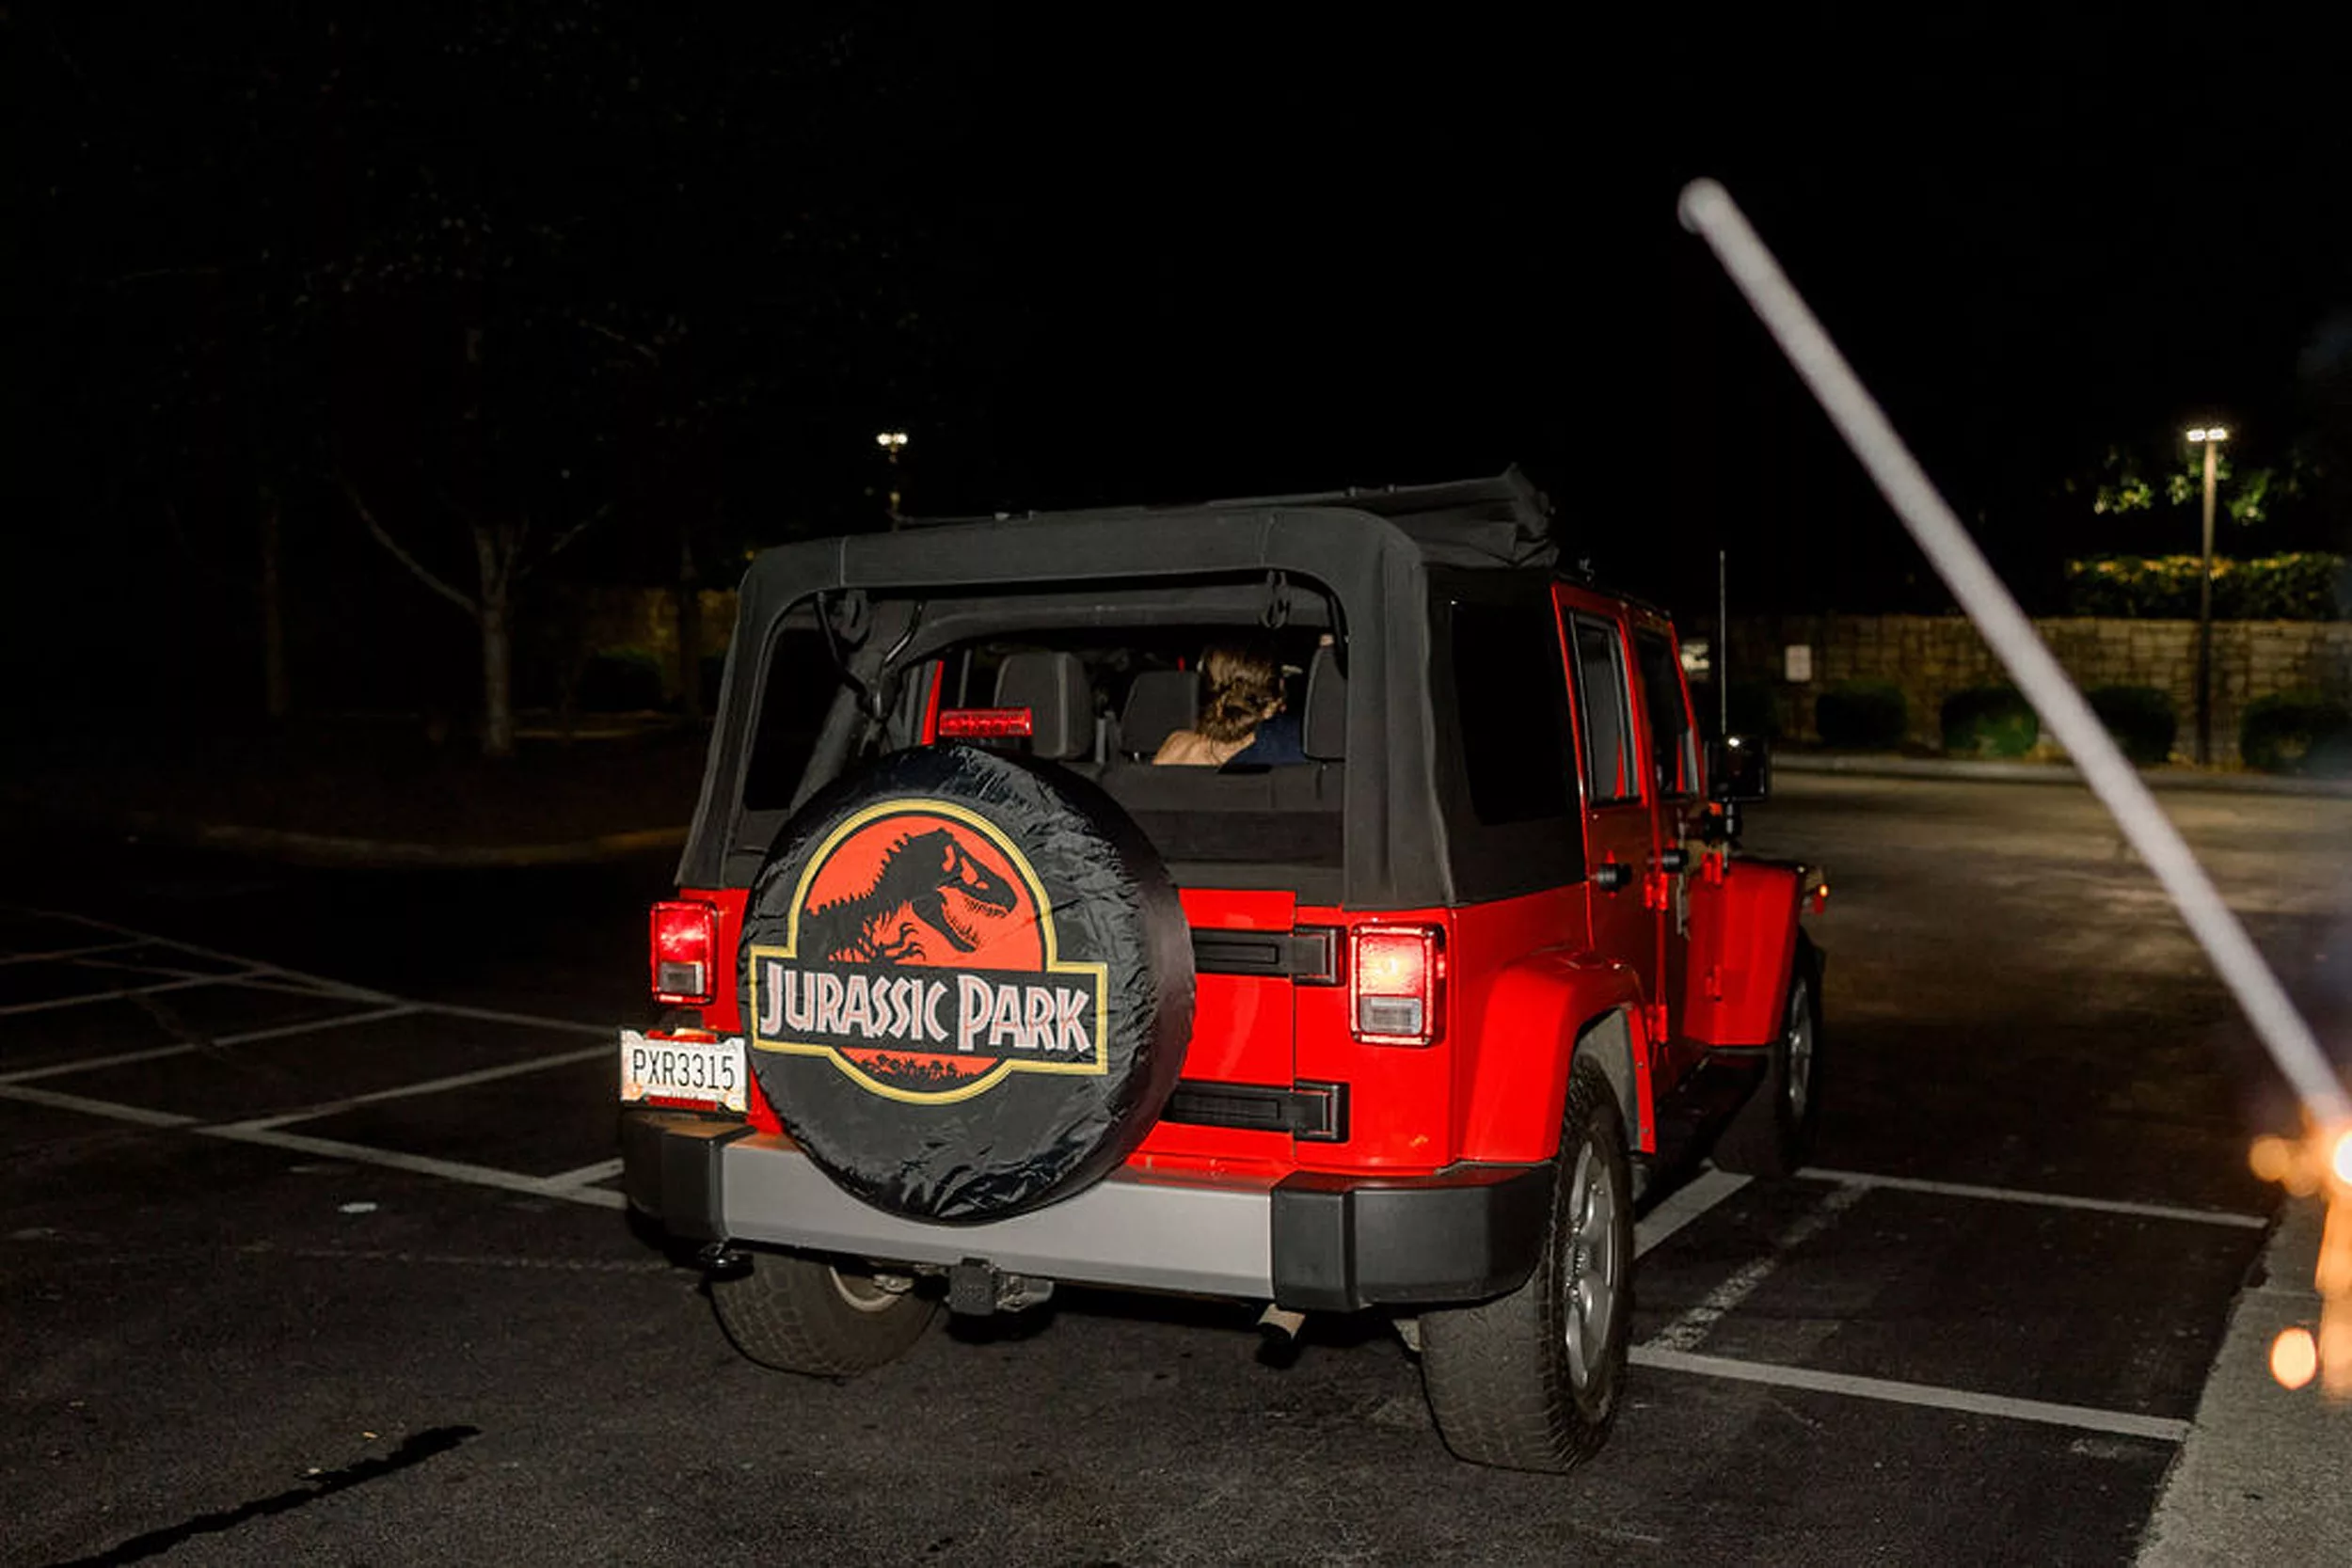 A red Jeep with a Jurassic Park tire cover leaves a wedding with the newlyweds in the back